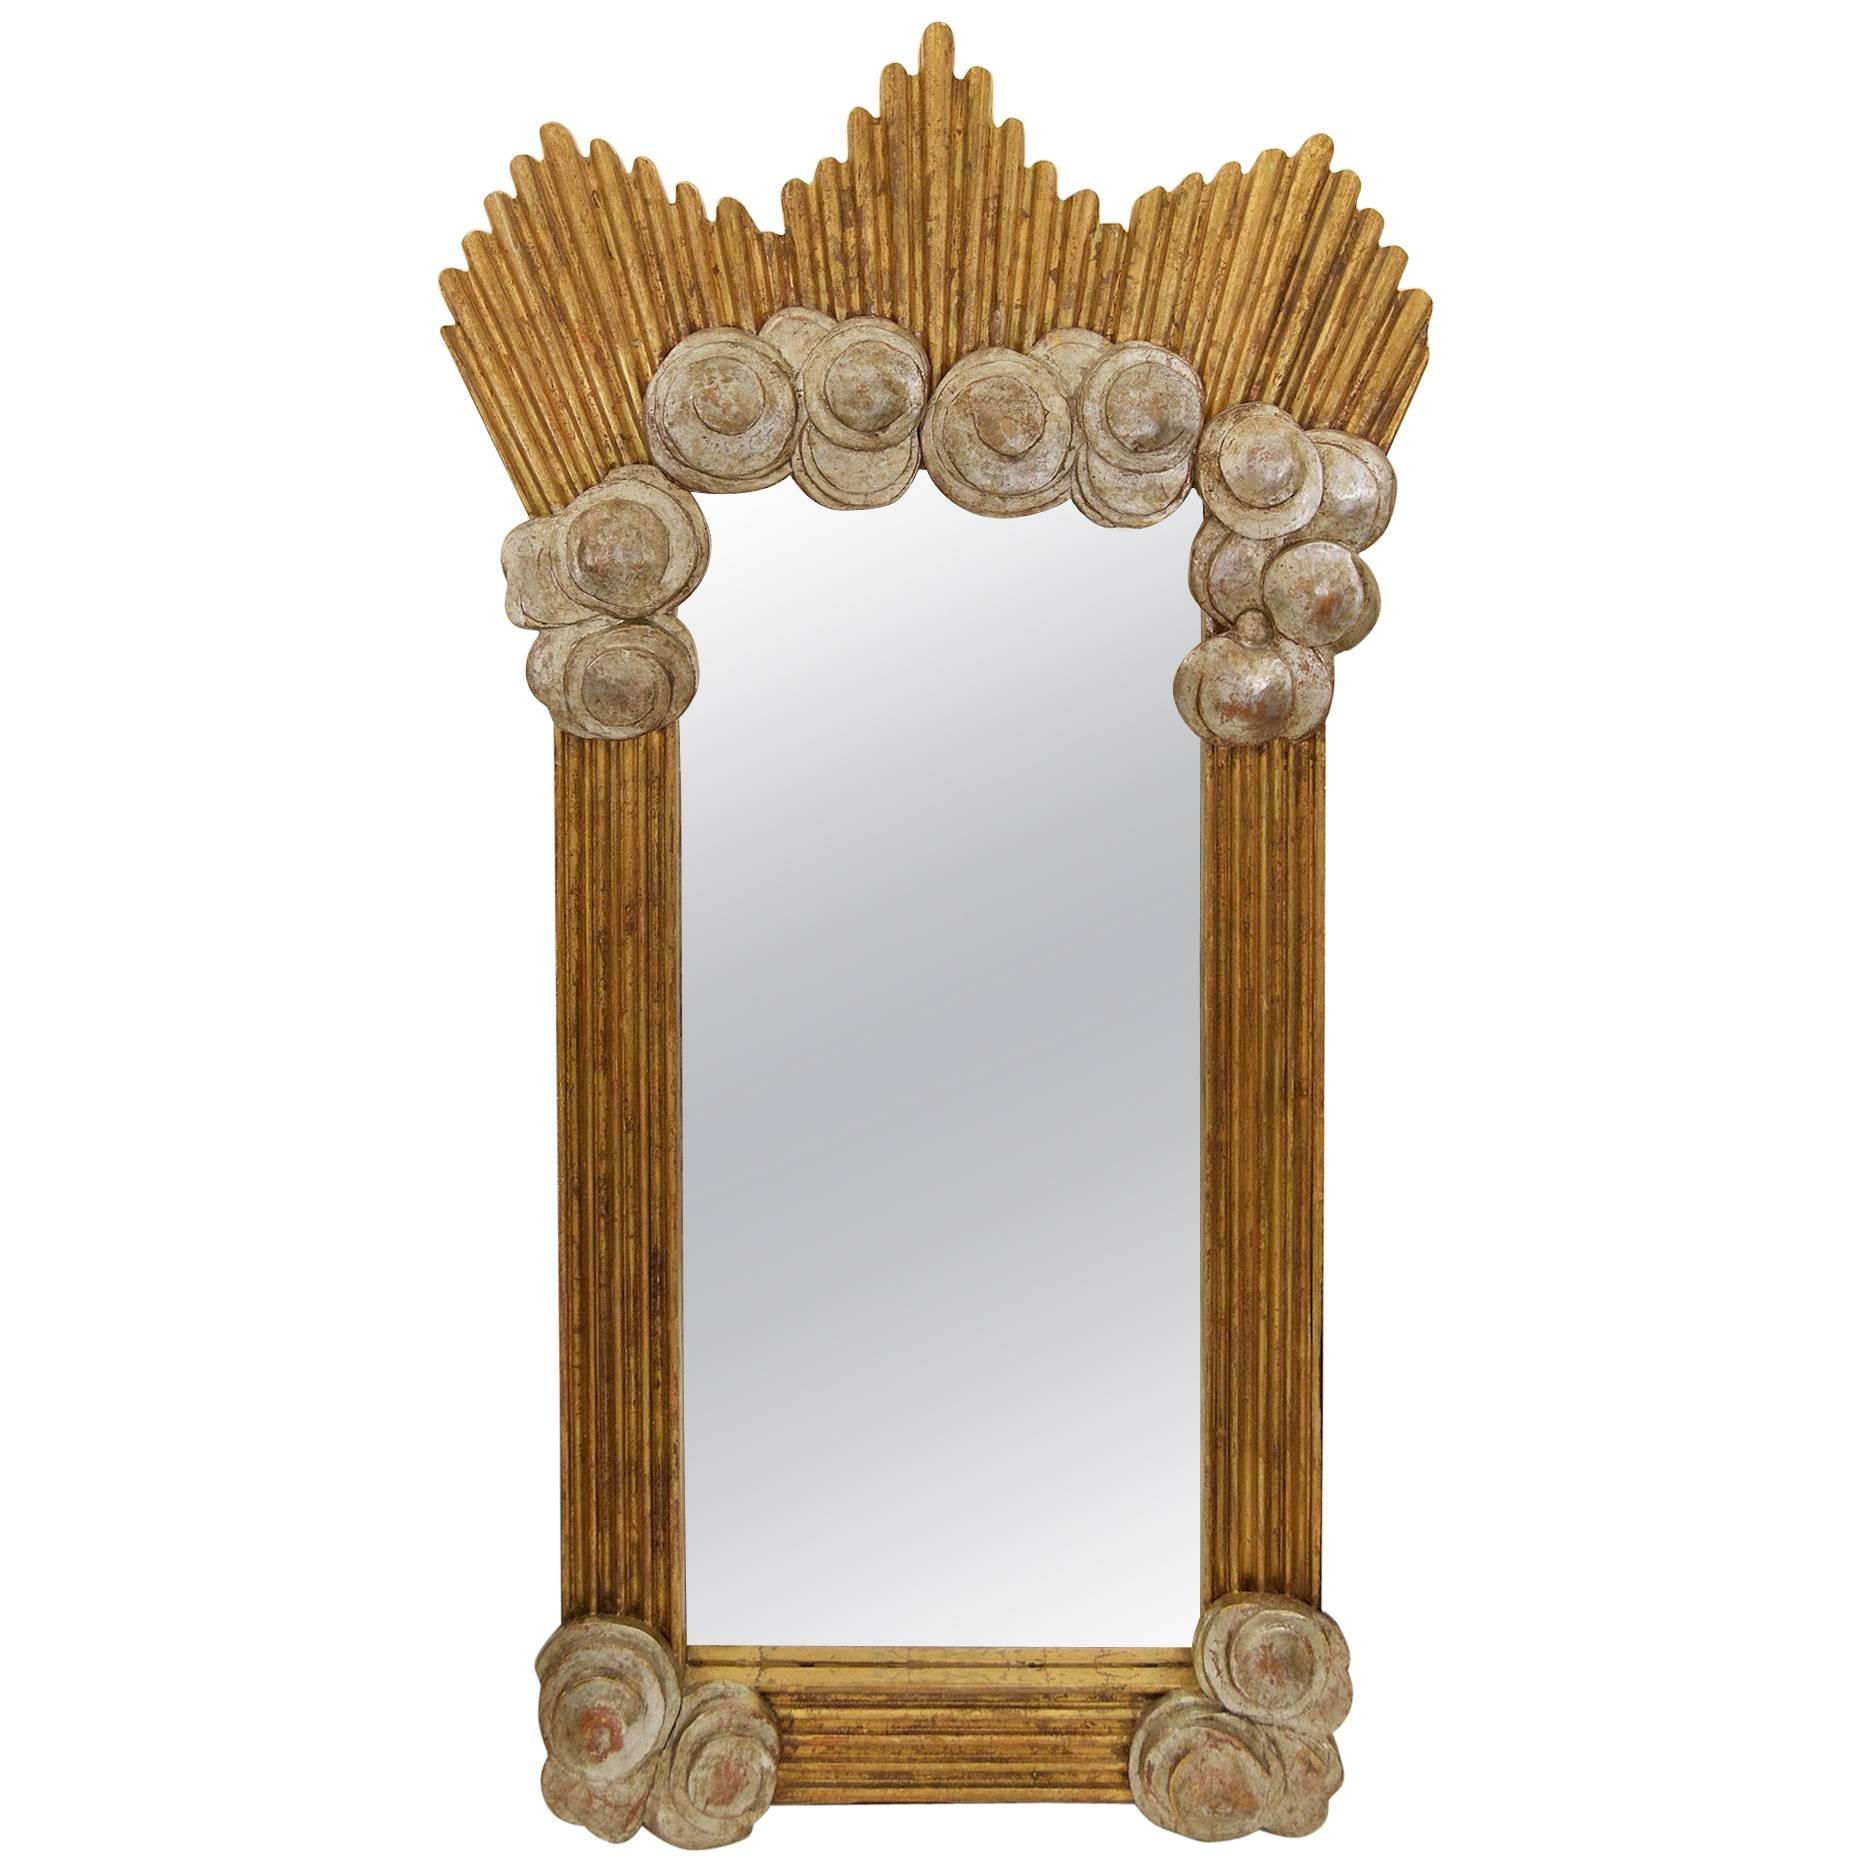 Massive Silver and Gold Leafed Art Deco Style Mirror